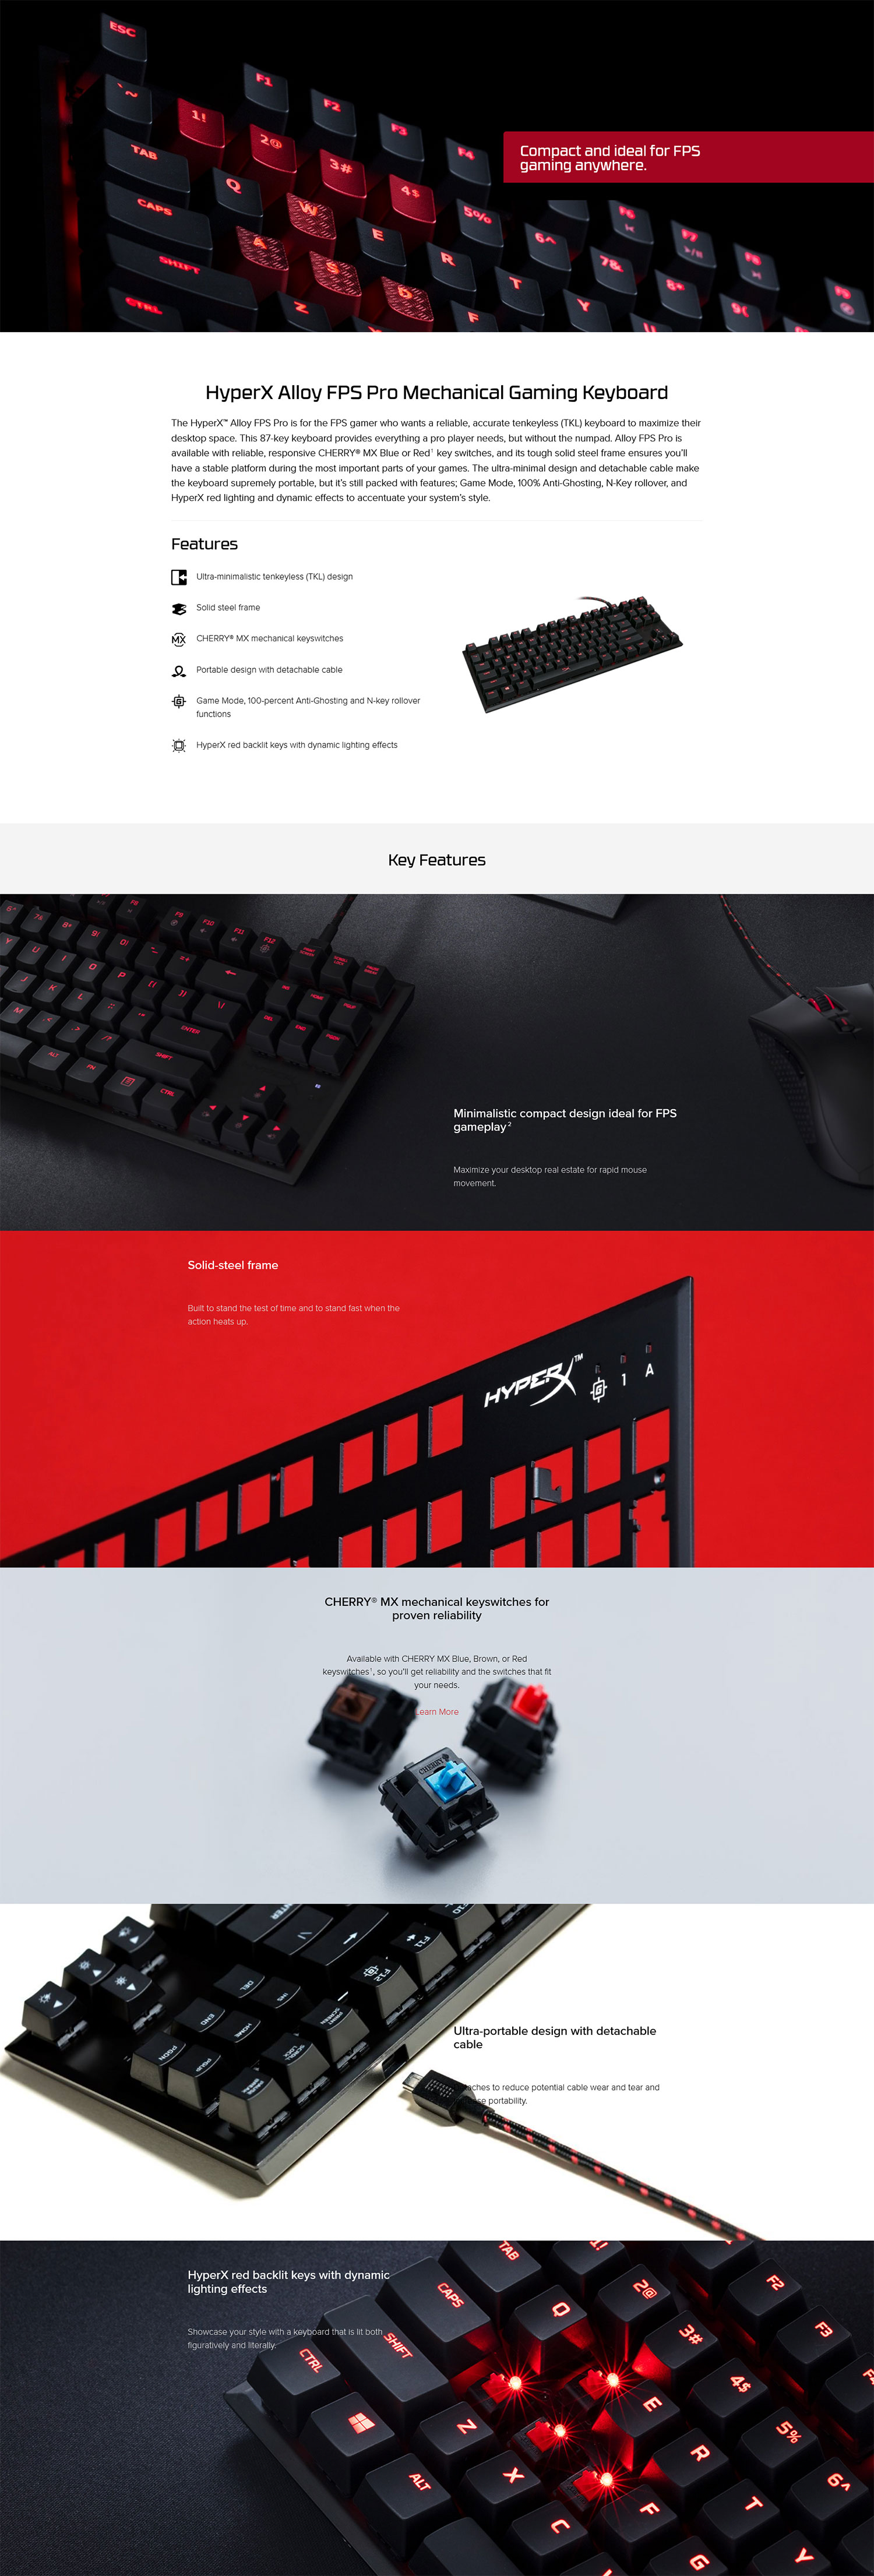 Kingston HyperX Alloy FPS Mechanical Gaming Keyboard - Cherry Mx Red Details